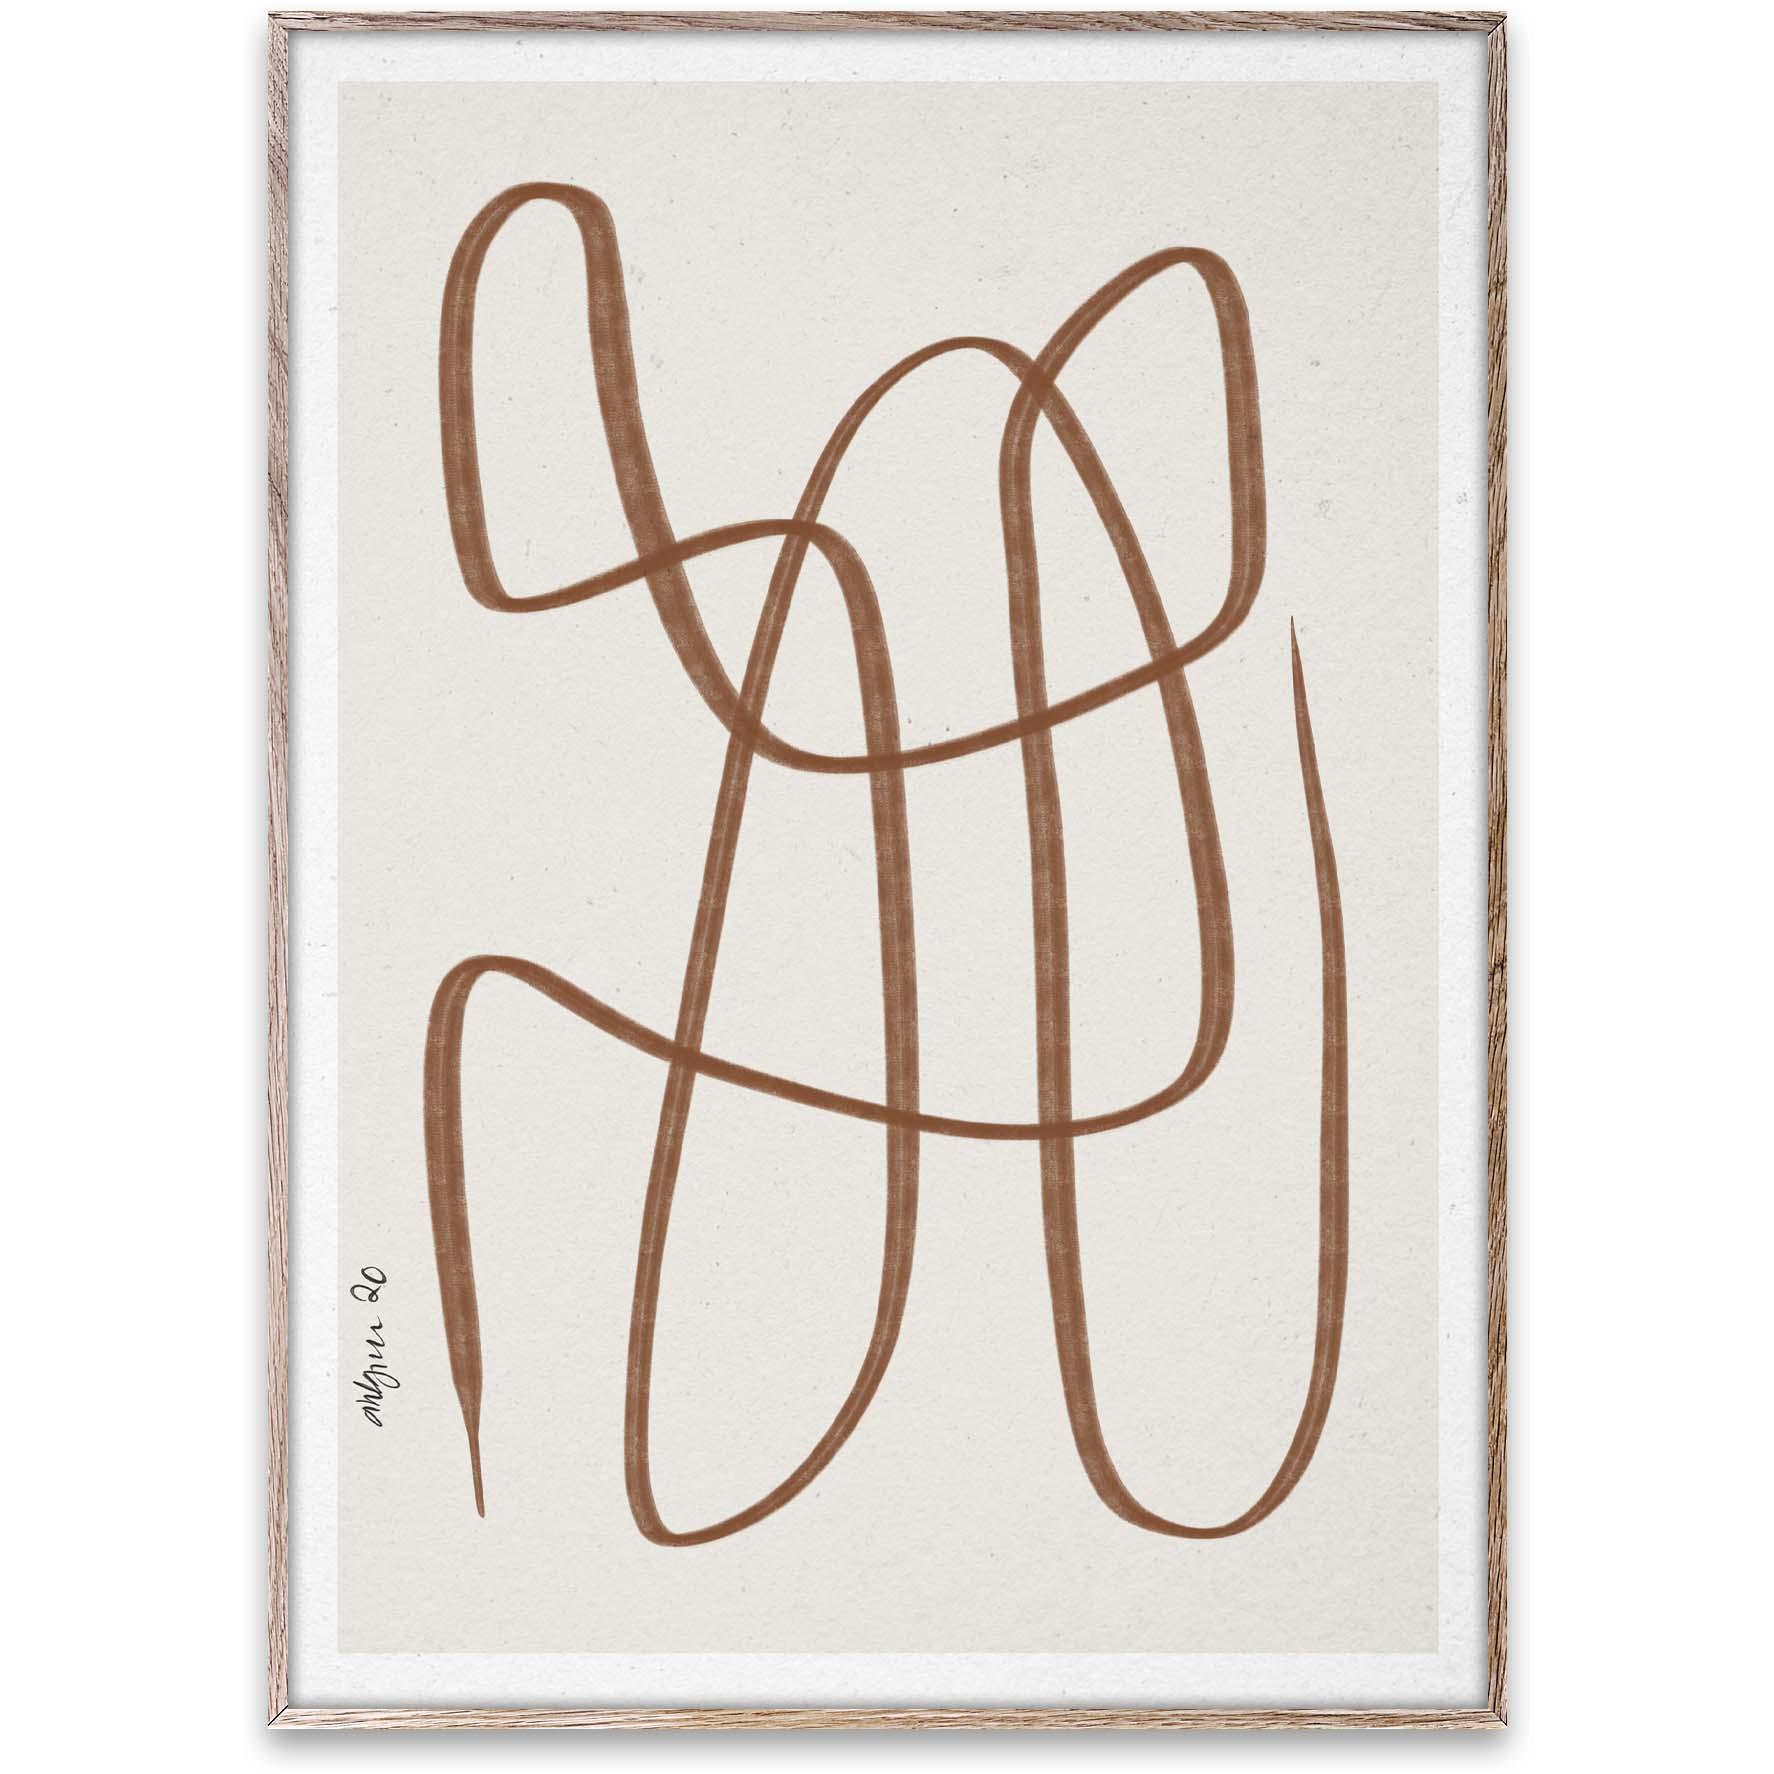 Paper Collective Different Ways Poster 50x70 Cm, Brown